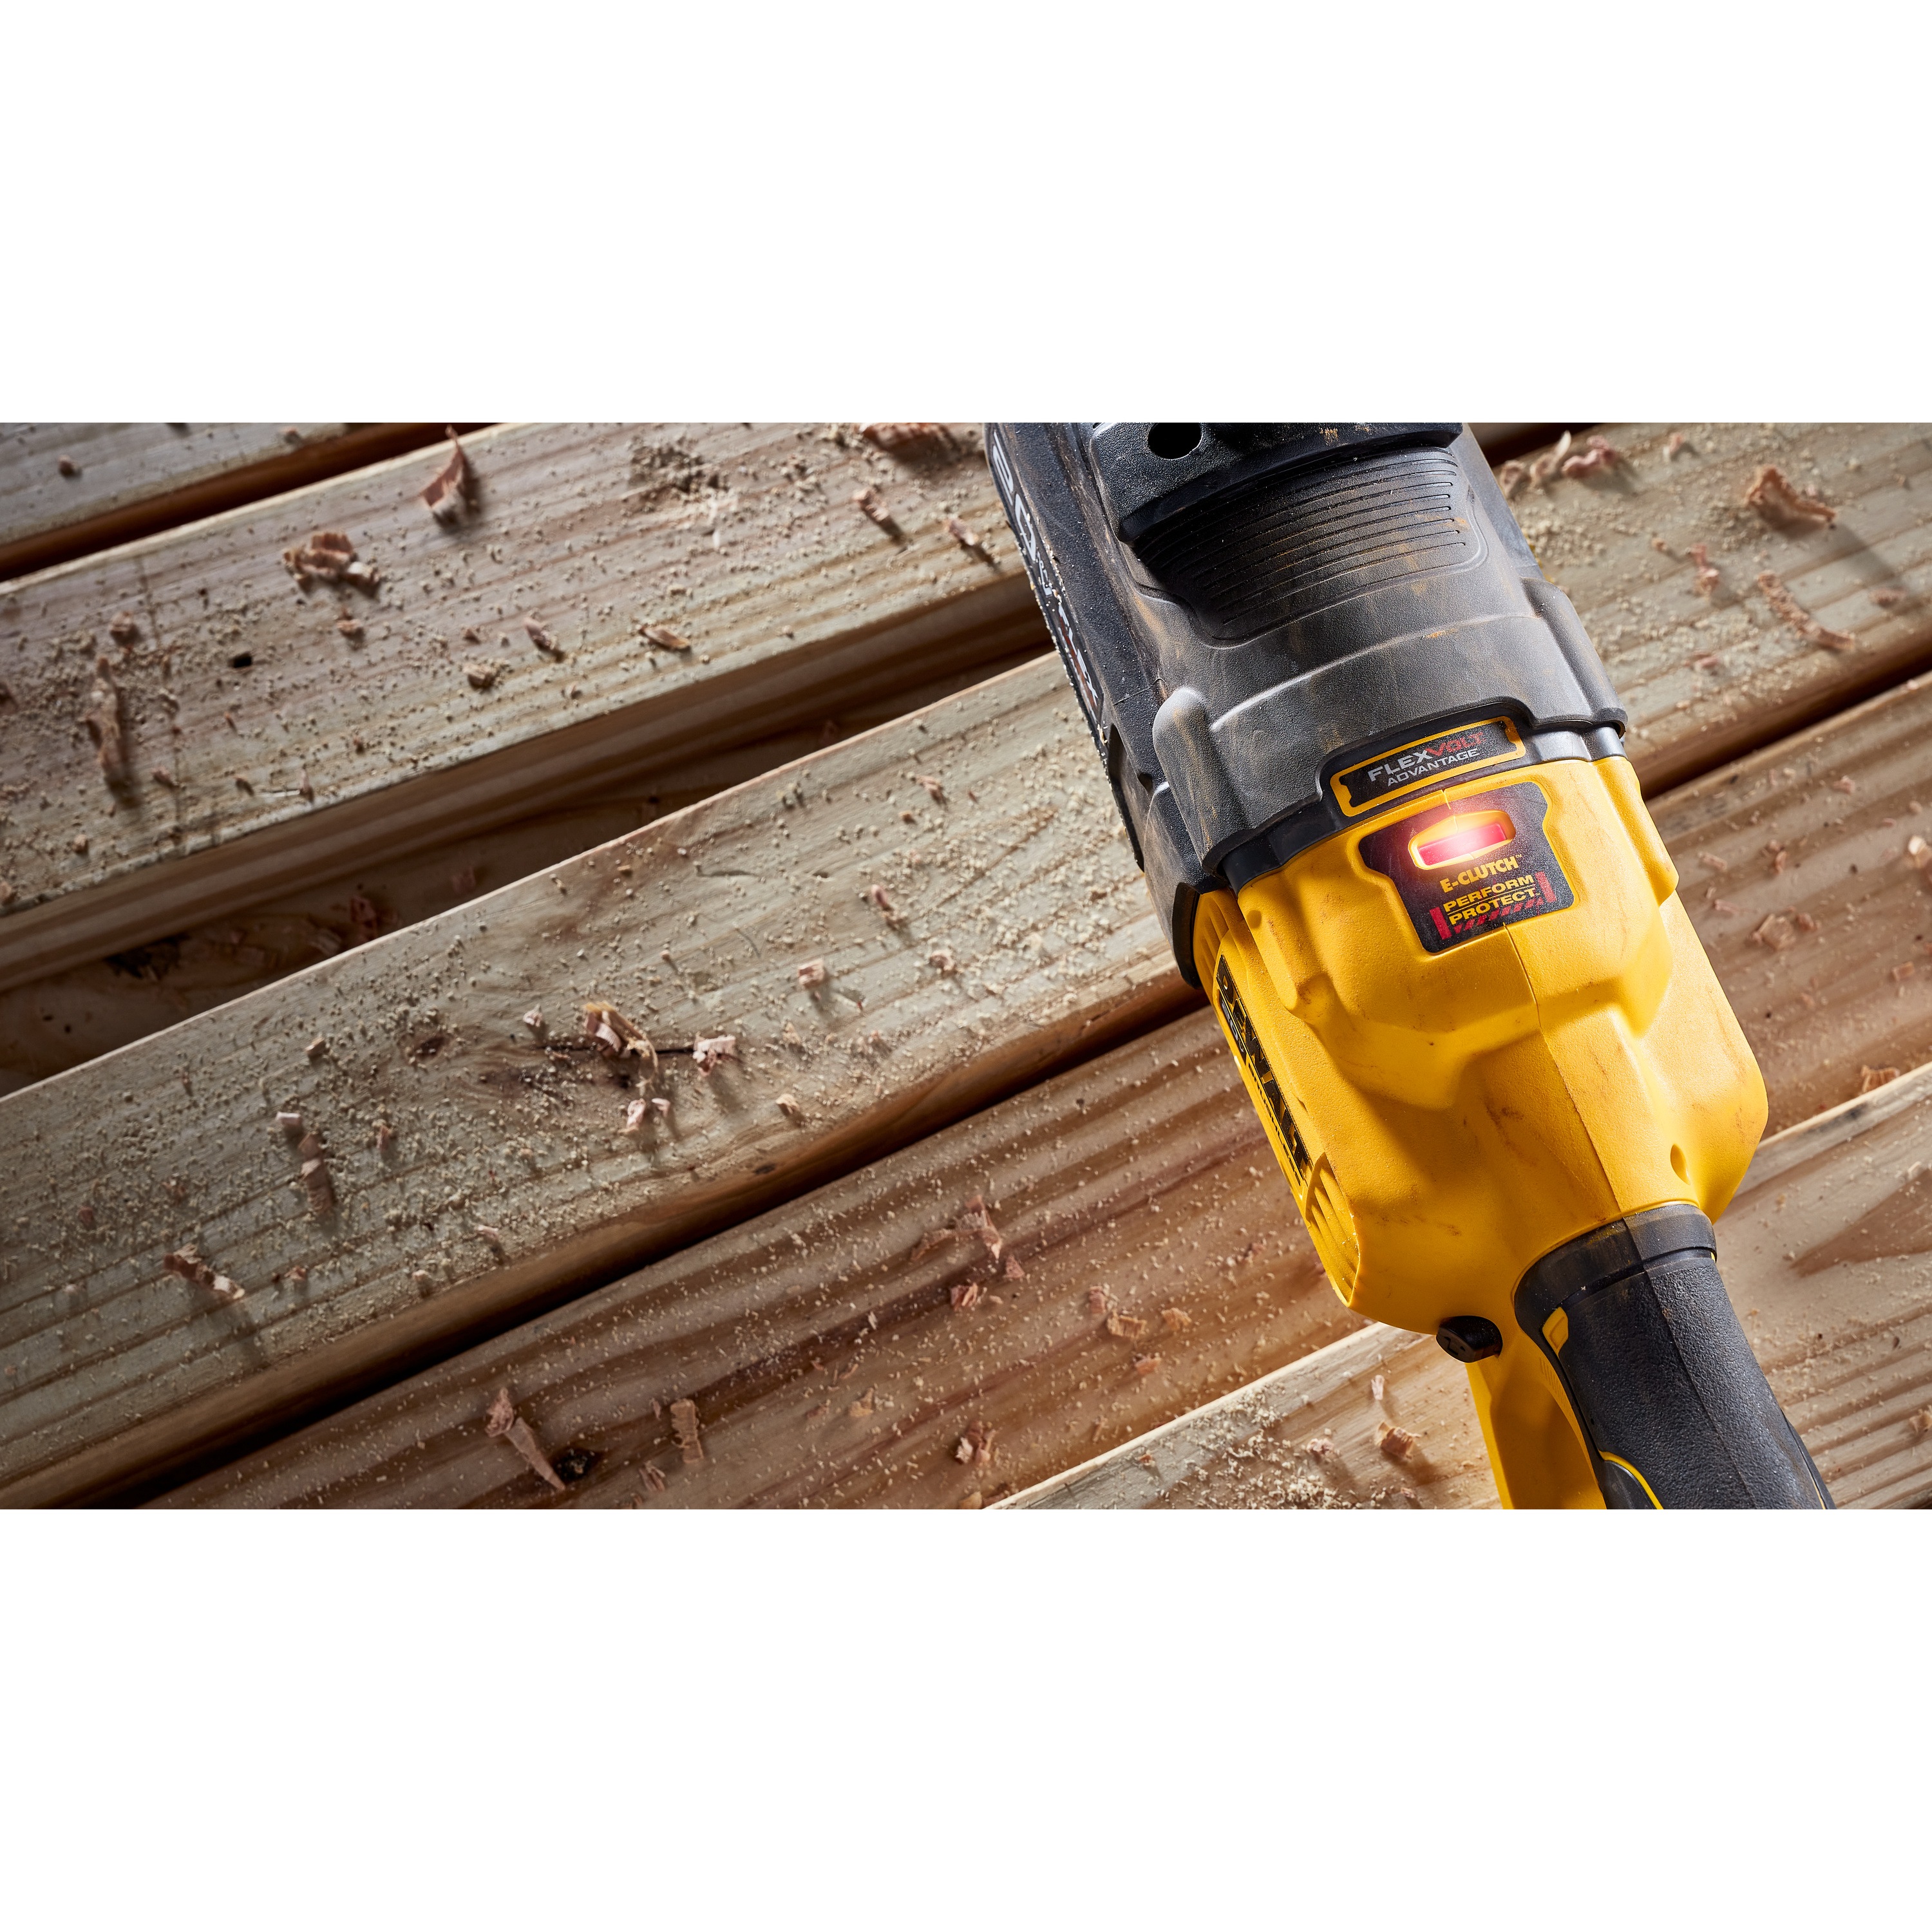 DEWALT - 20V MAX Brushless Cordless 716 in Compact Quick Change Stud and Joist Drill with FLEXVOLT ADVANTAGE Tool Only - DCD445B